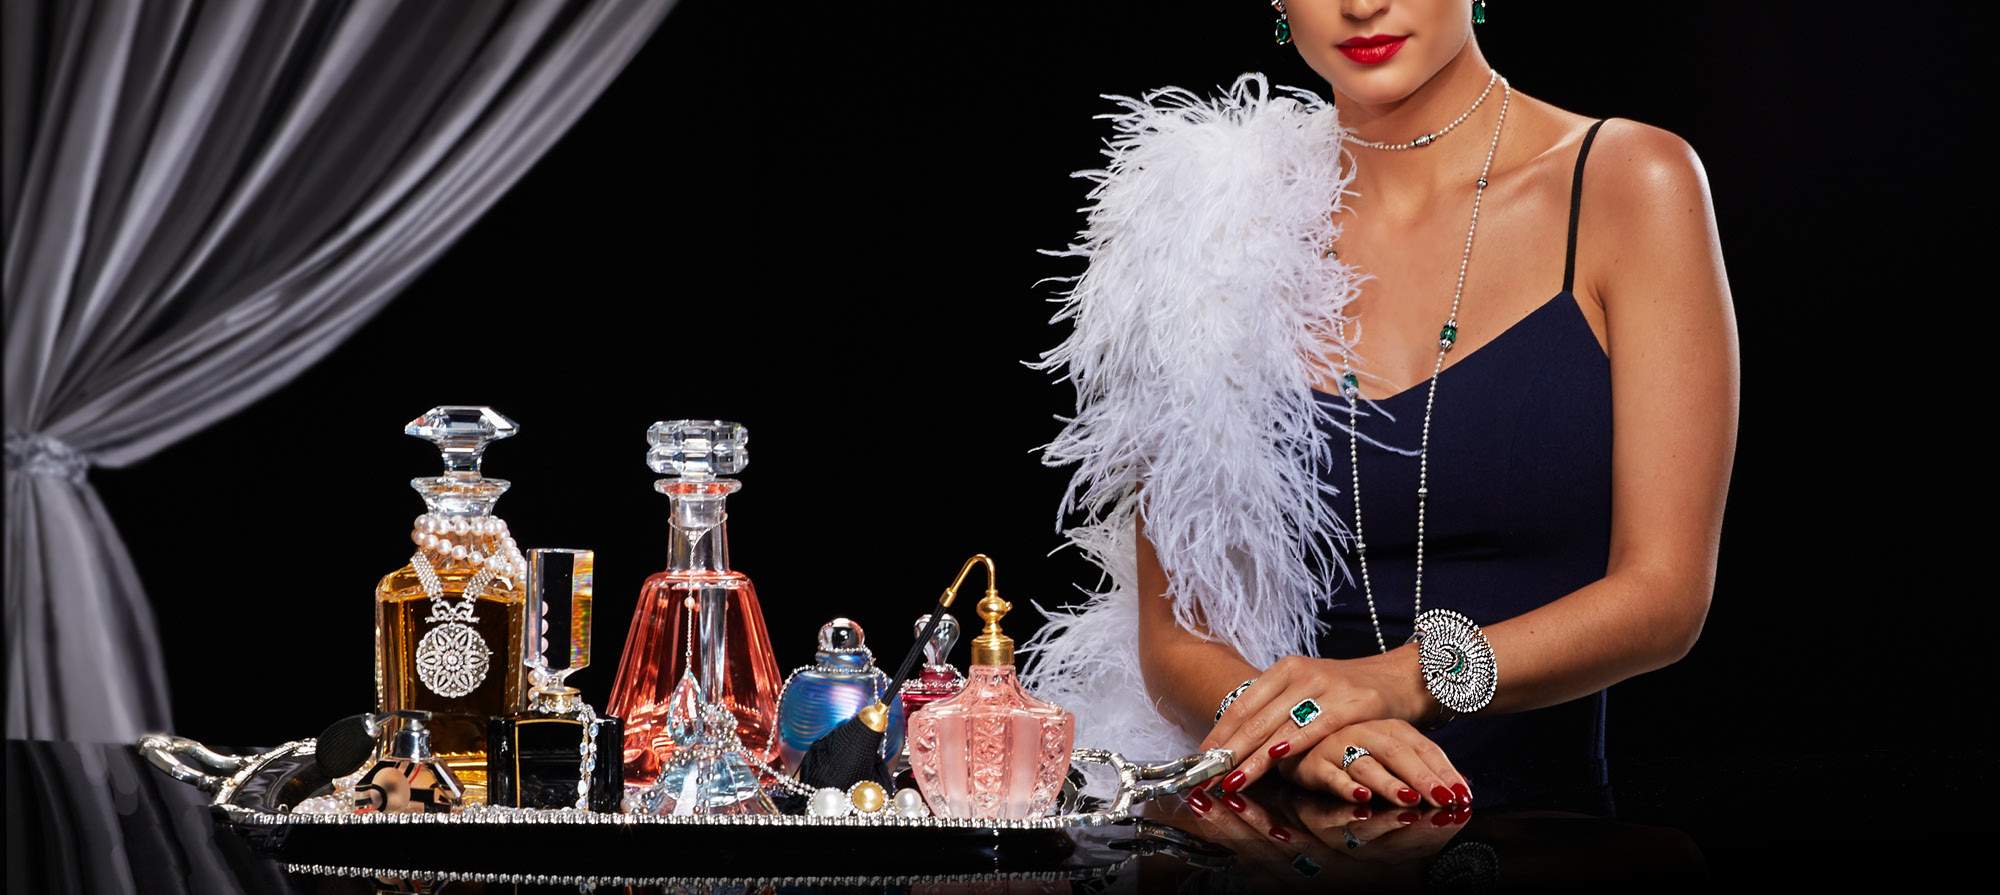 Woman wearing a black dress with a tray of perfumes sitting next to her, wearing a white feather boa and vintage antique emerald earrings, necklace, bracelet and rings black background